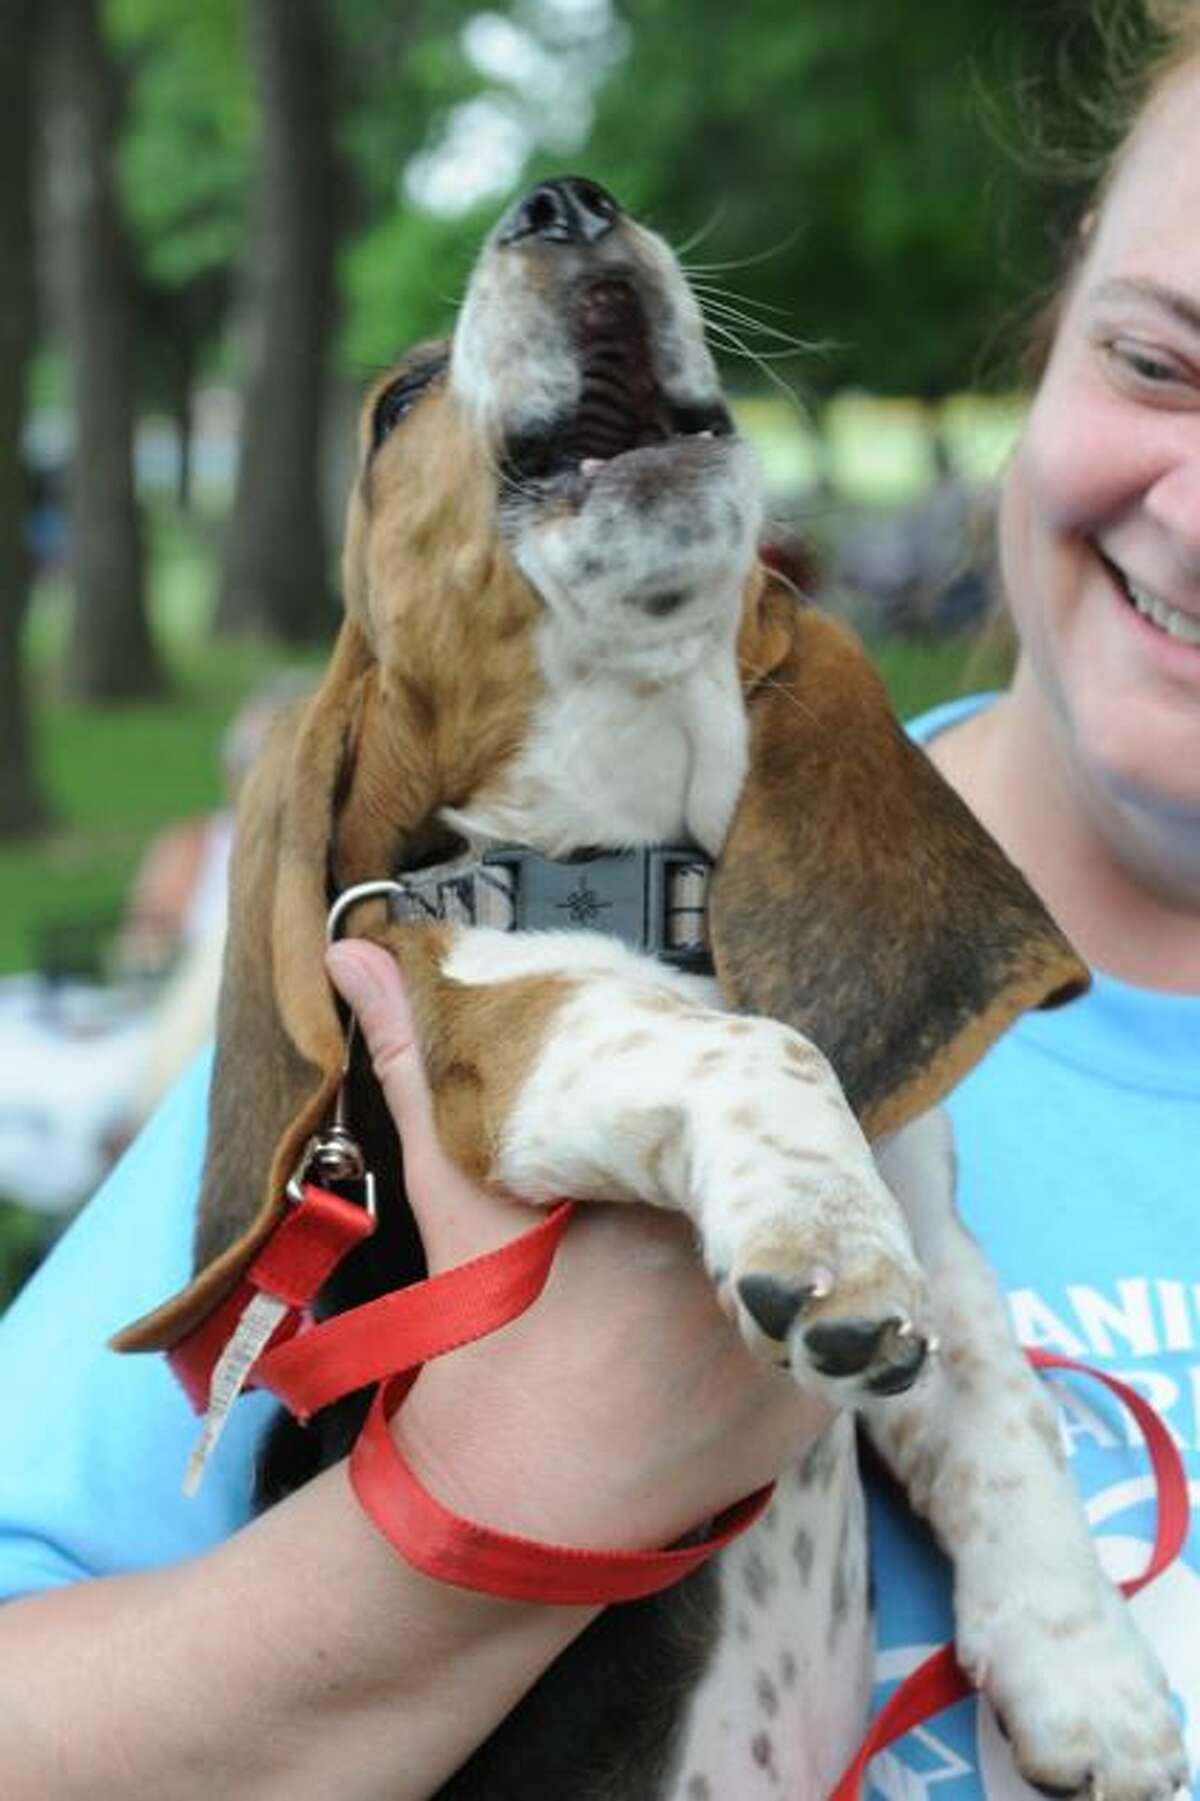 Rex the puppy gives a trademark Basset Hound call during Saturday's Pawty in the Park.